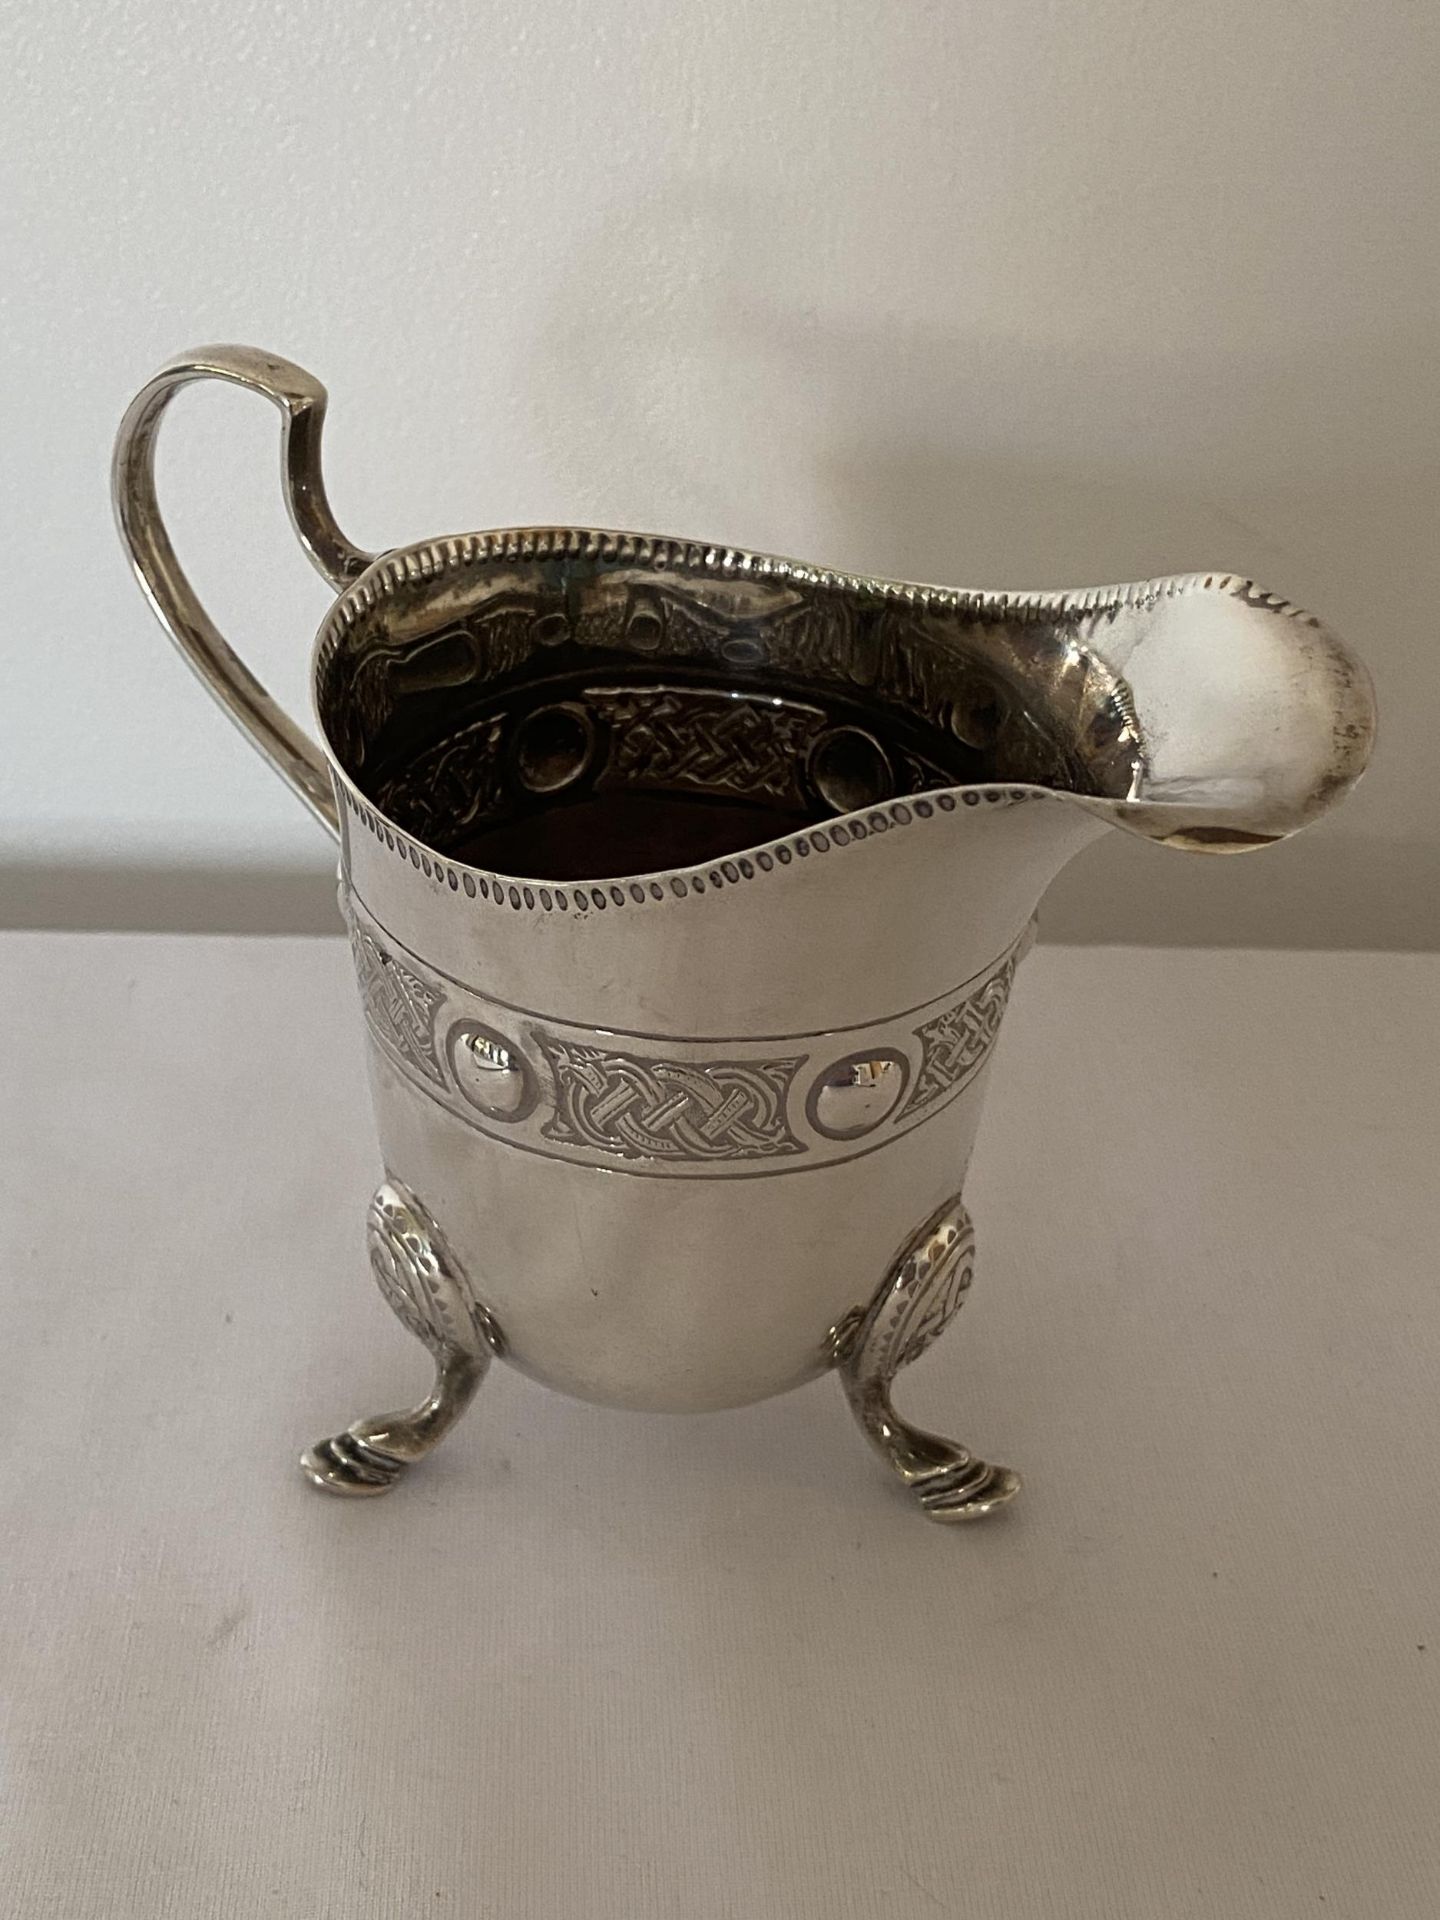 A GEORGE V 1917 HALLMARKED DUBLIN SILVER TANKARD, MAKER T WEIR & SONS, GROSS WEIGHT 163 GRAMS - Image 6 of 12